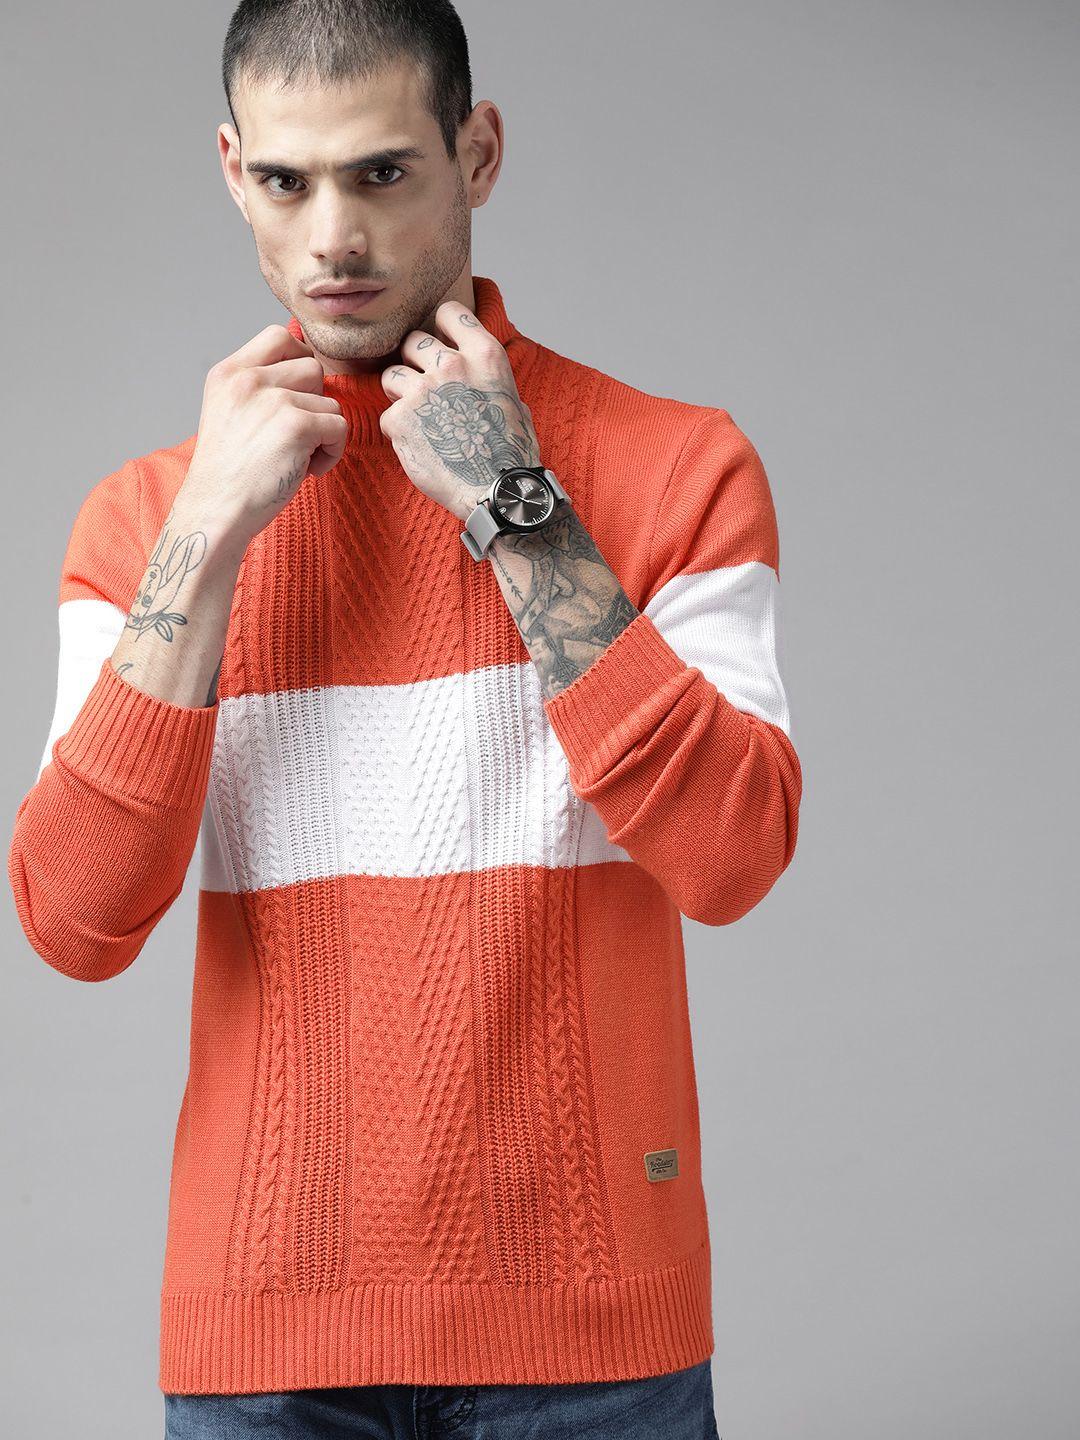 the-roadster-lifestyle-co.-men-red-&-white-striped-acrylic-turtle-neck-pullover